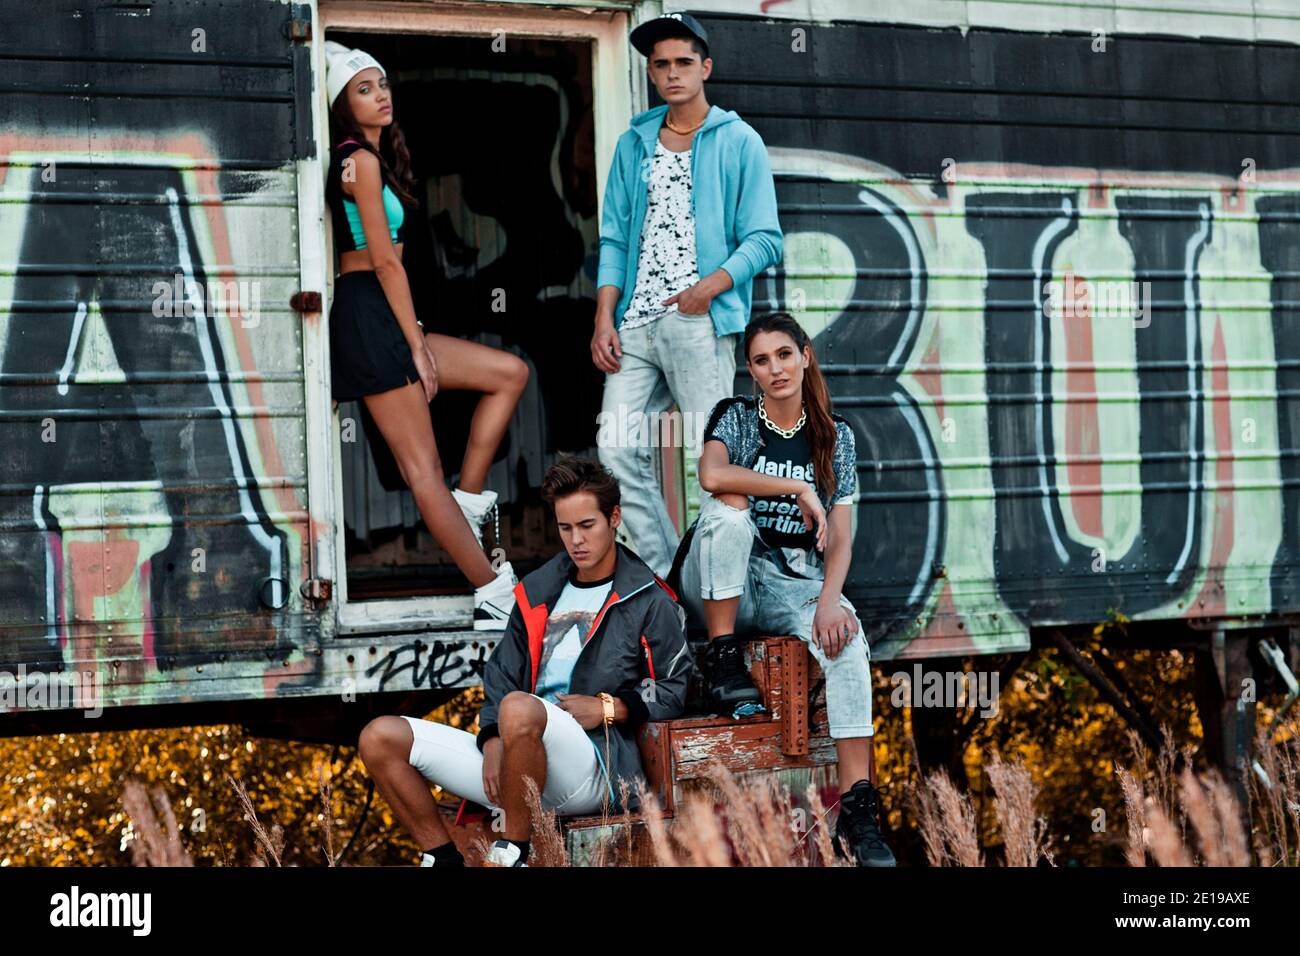 A portrait of an interracial group of 4 young adults lounging on wooden stairs in front of an open graffiti sprayed container on a vacant lot. Stock Photo